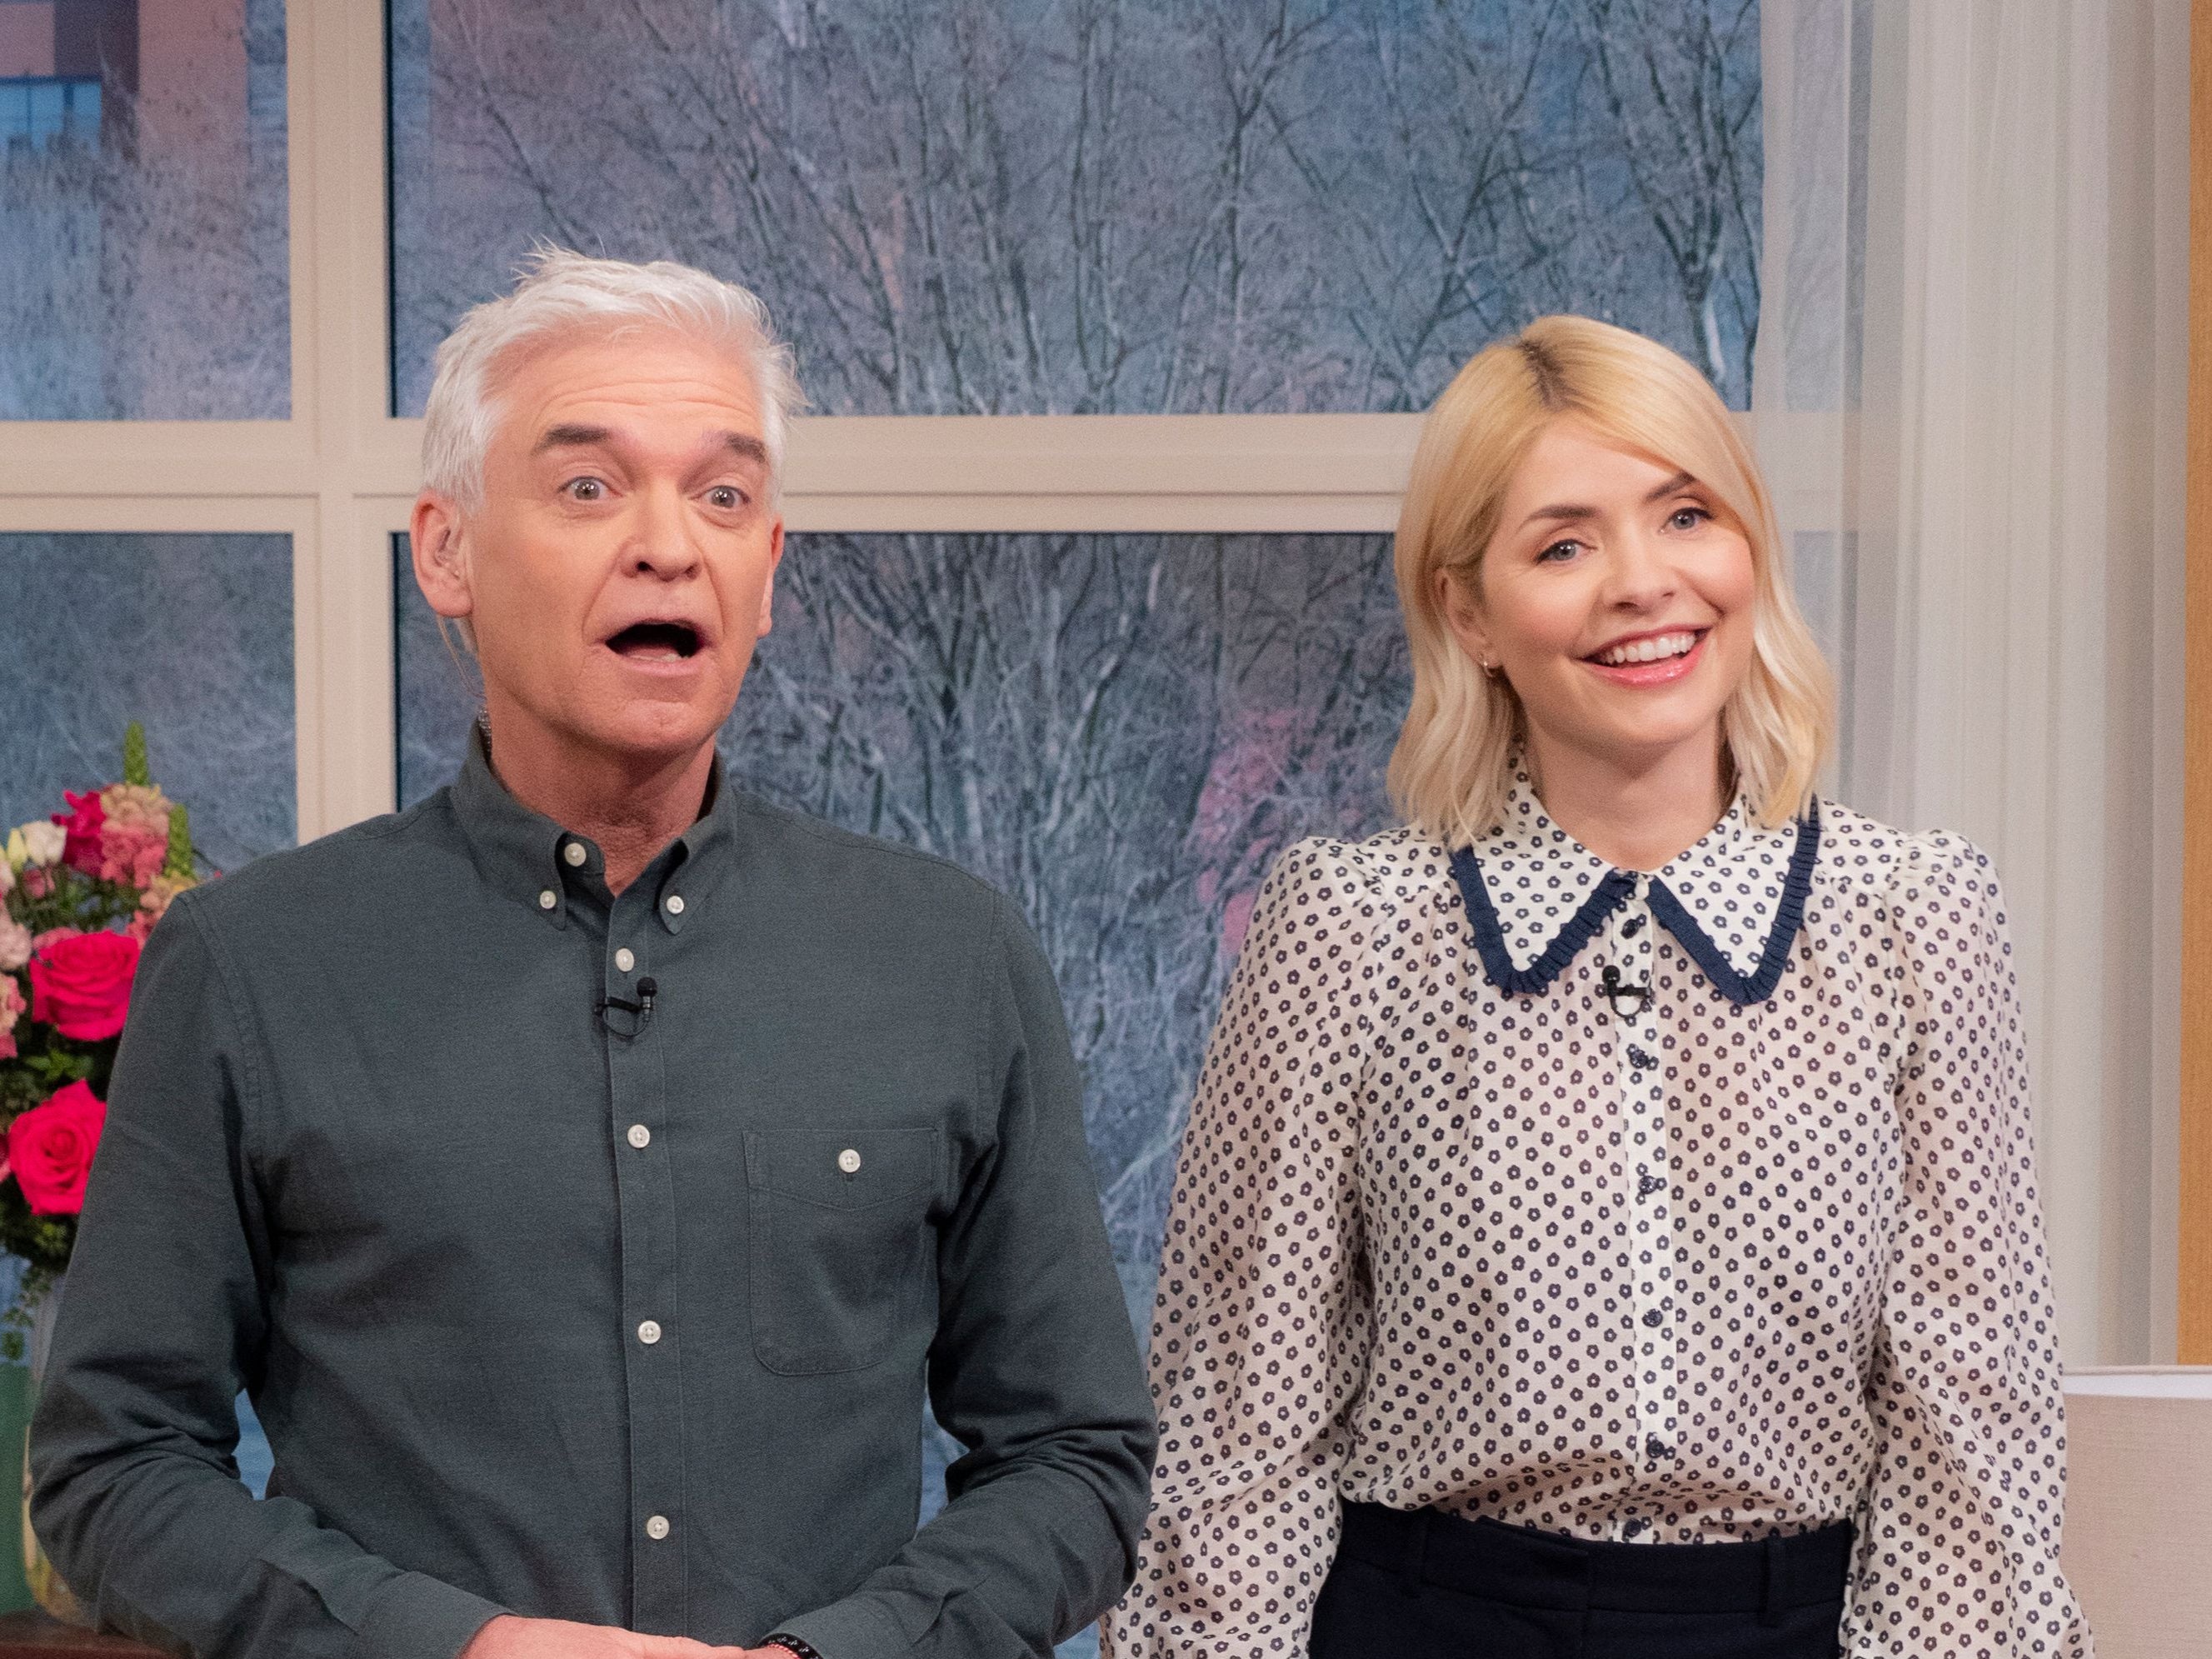 Schofield presented the show alongside Holly Willoughby until he quit last week